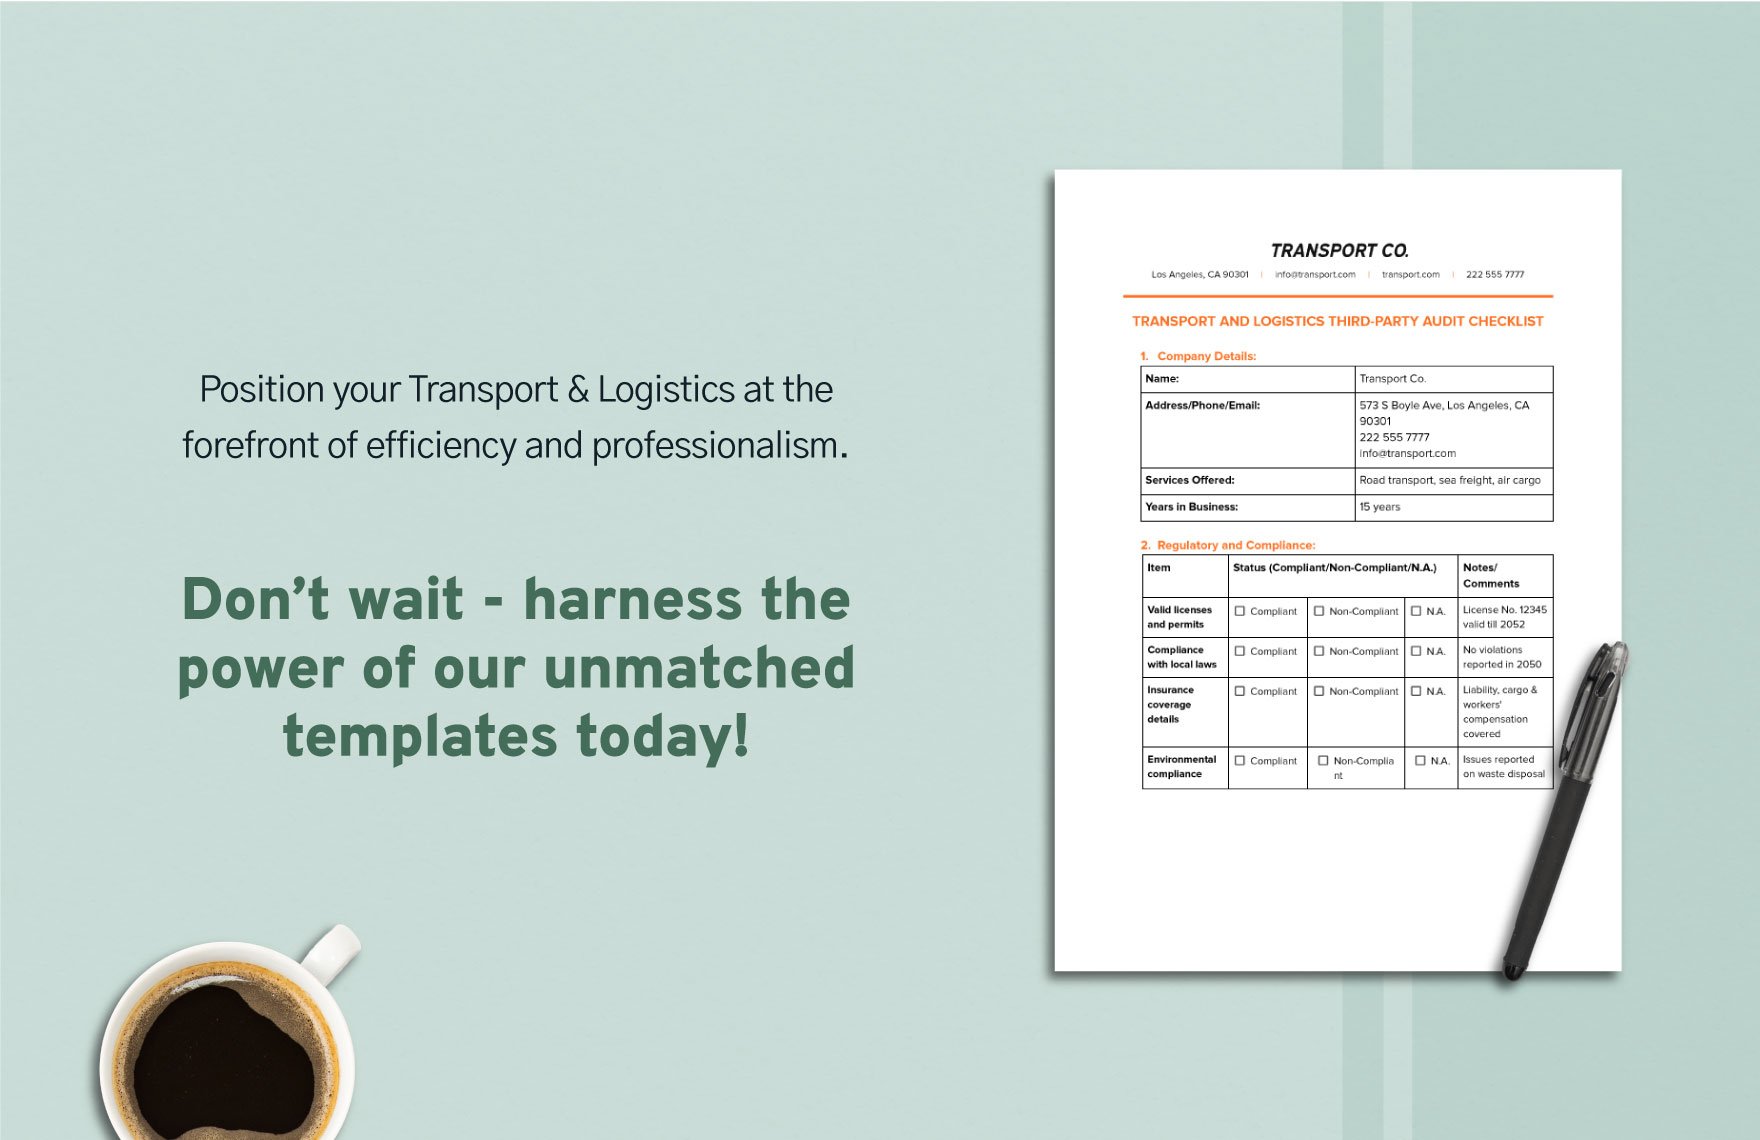 Transport and Logistics Safety Emergency Response Plan Template